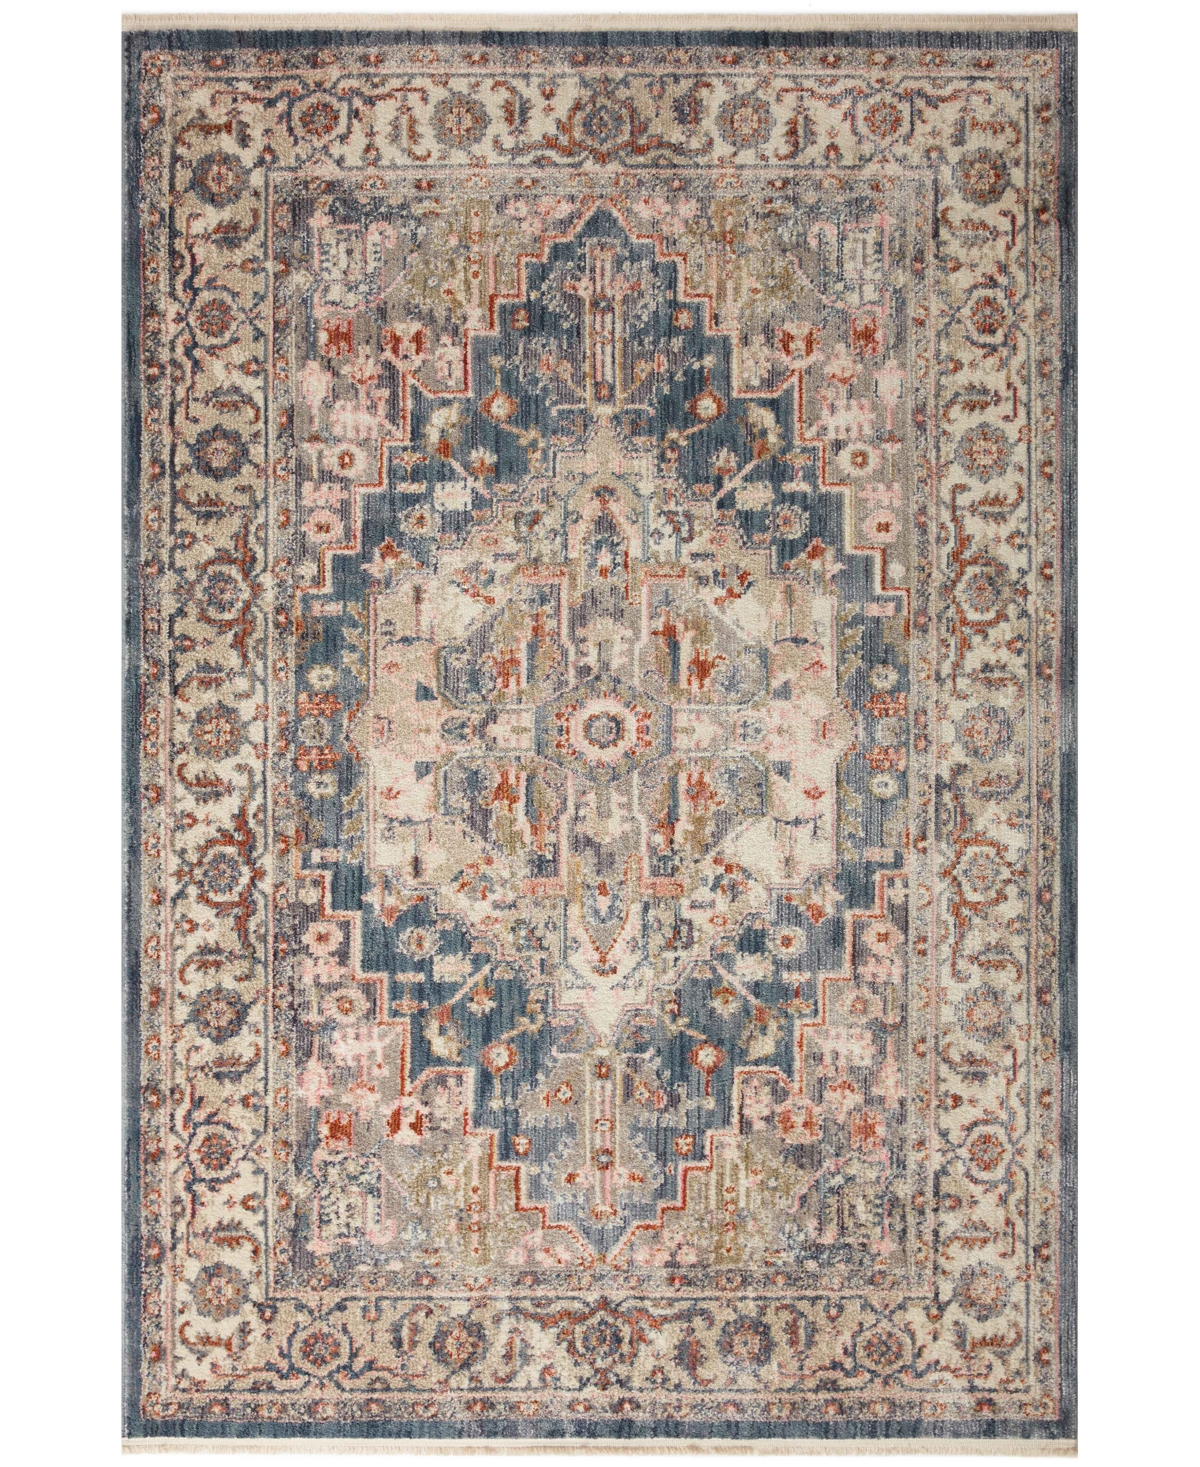 Magnolia Home By Joanna Gaines X Loloi Janey Jay-03 6'7" X 9'2" Area Rug In Indigo